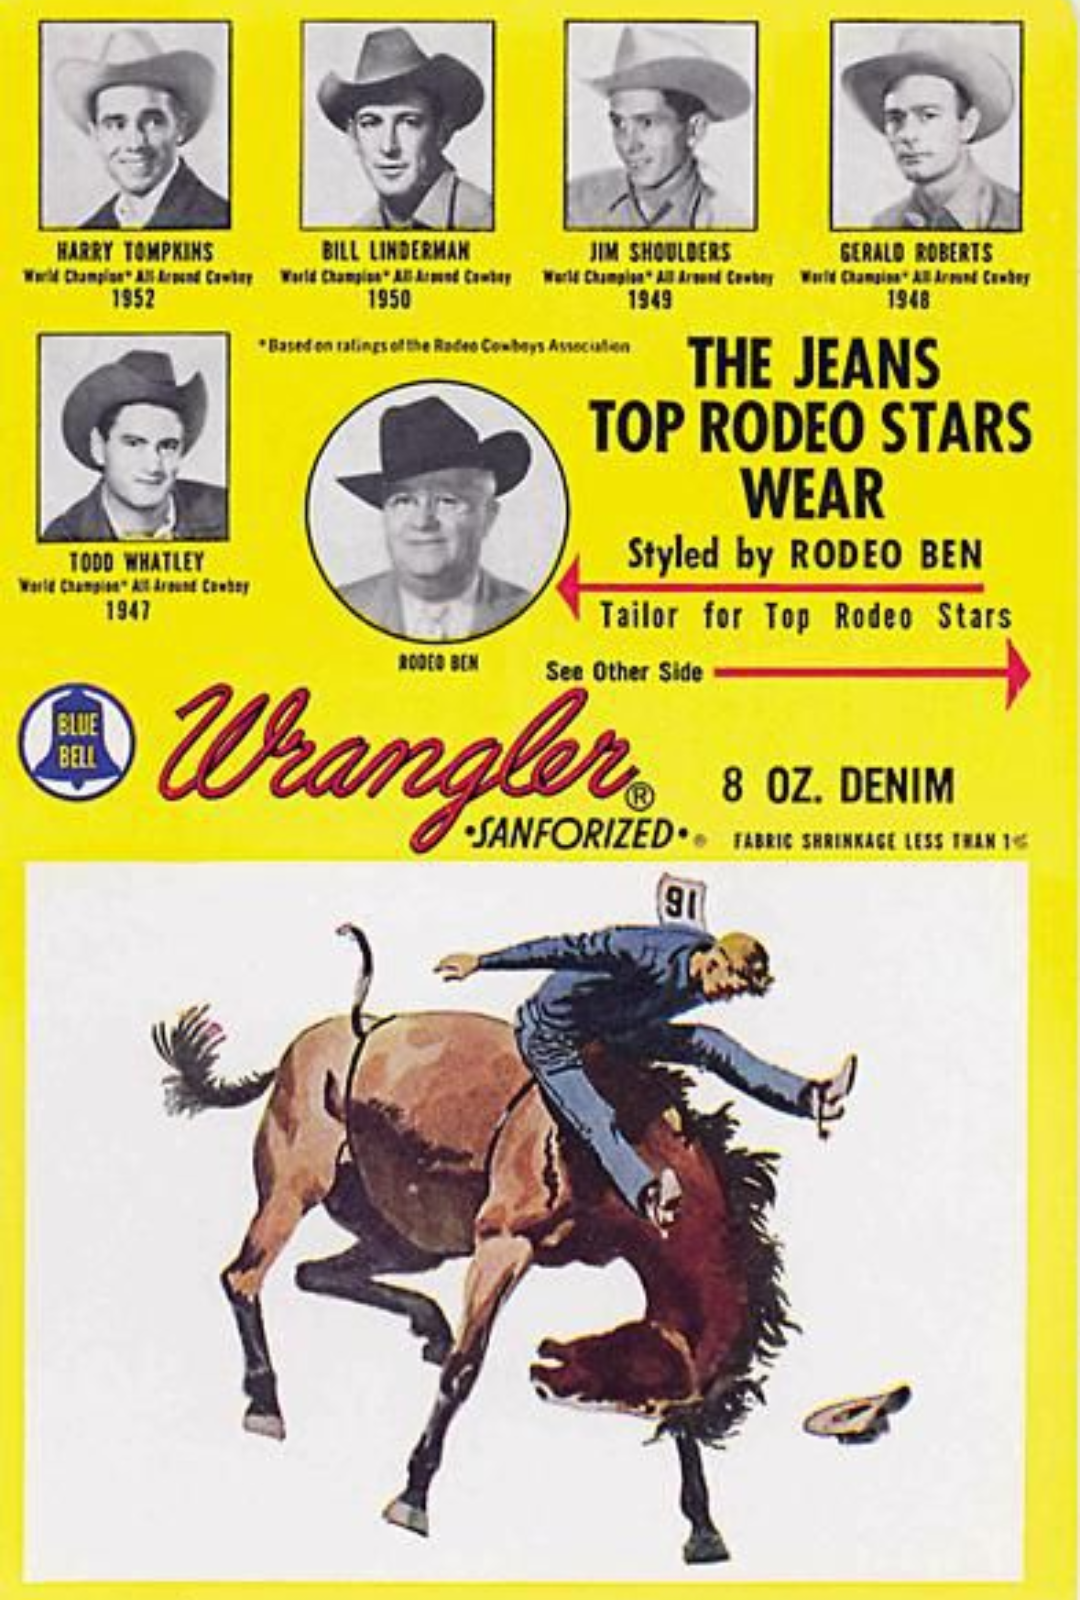 From the C&I Archives: The Story of Wrangler